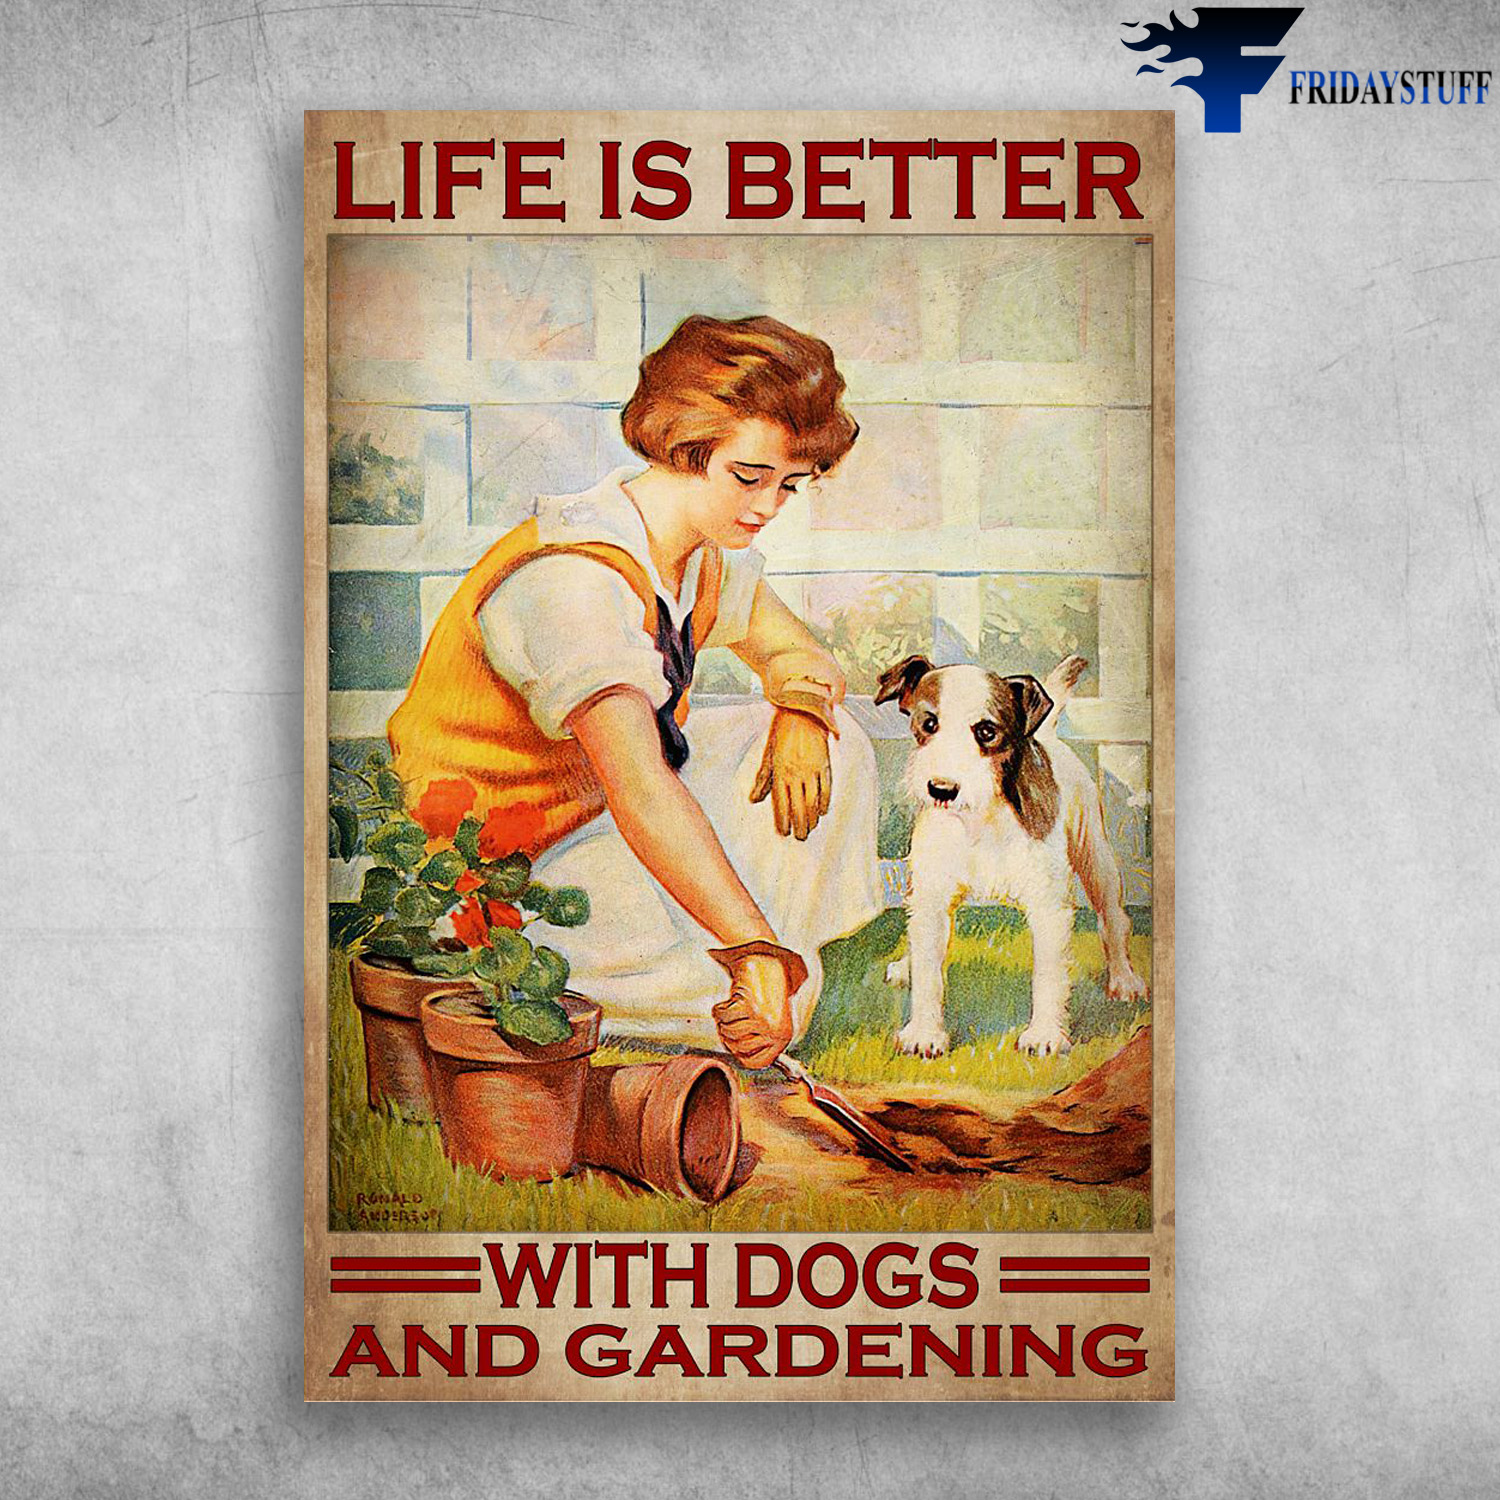 Girl Gardening With A Dog - Life Is Better With Dogs, And Gardening